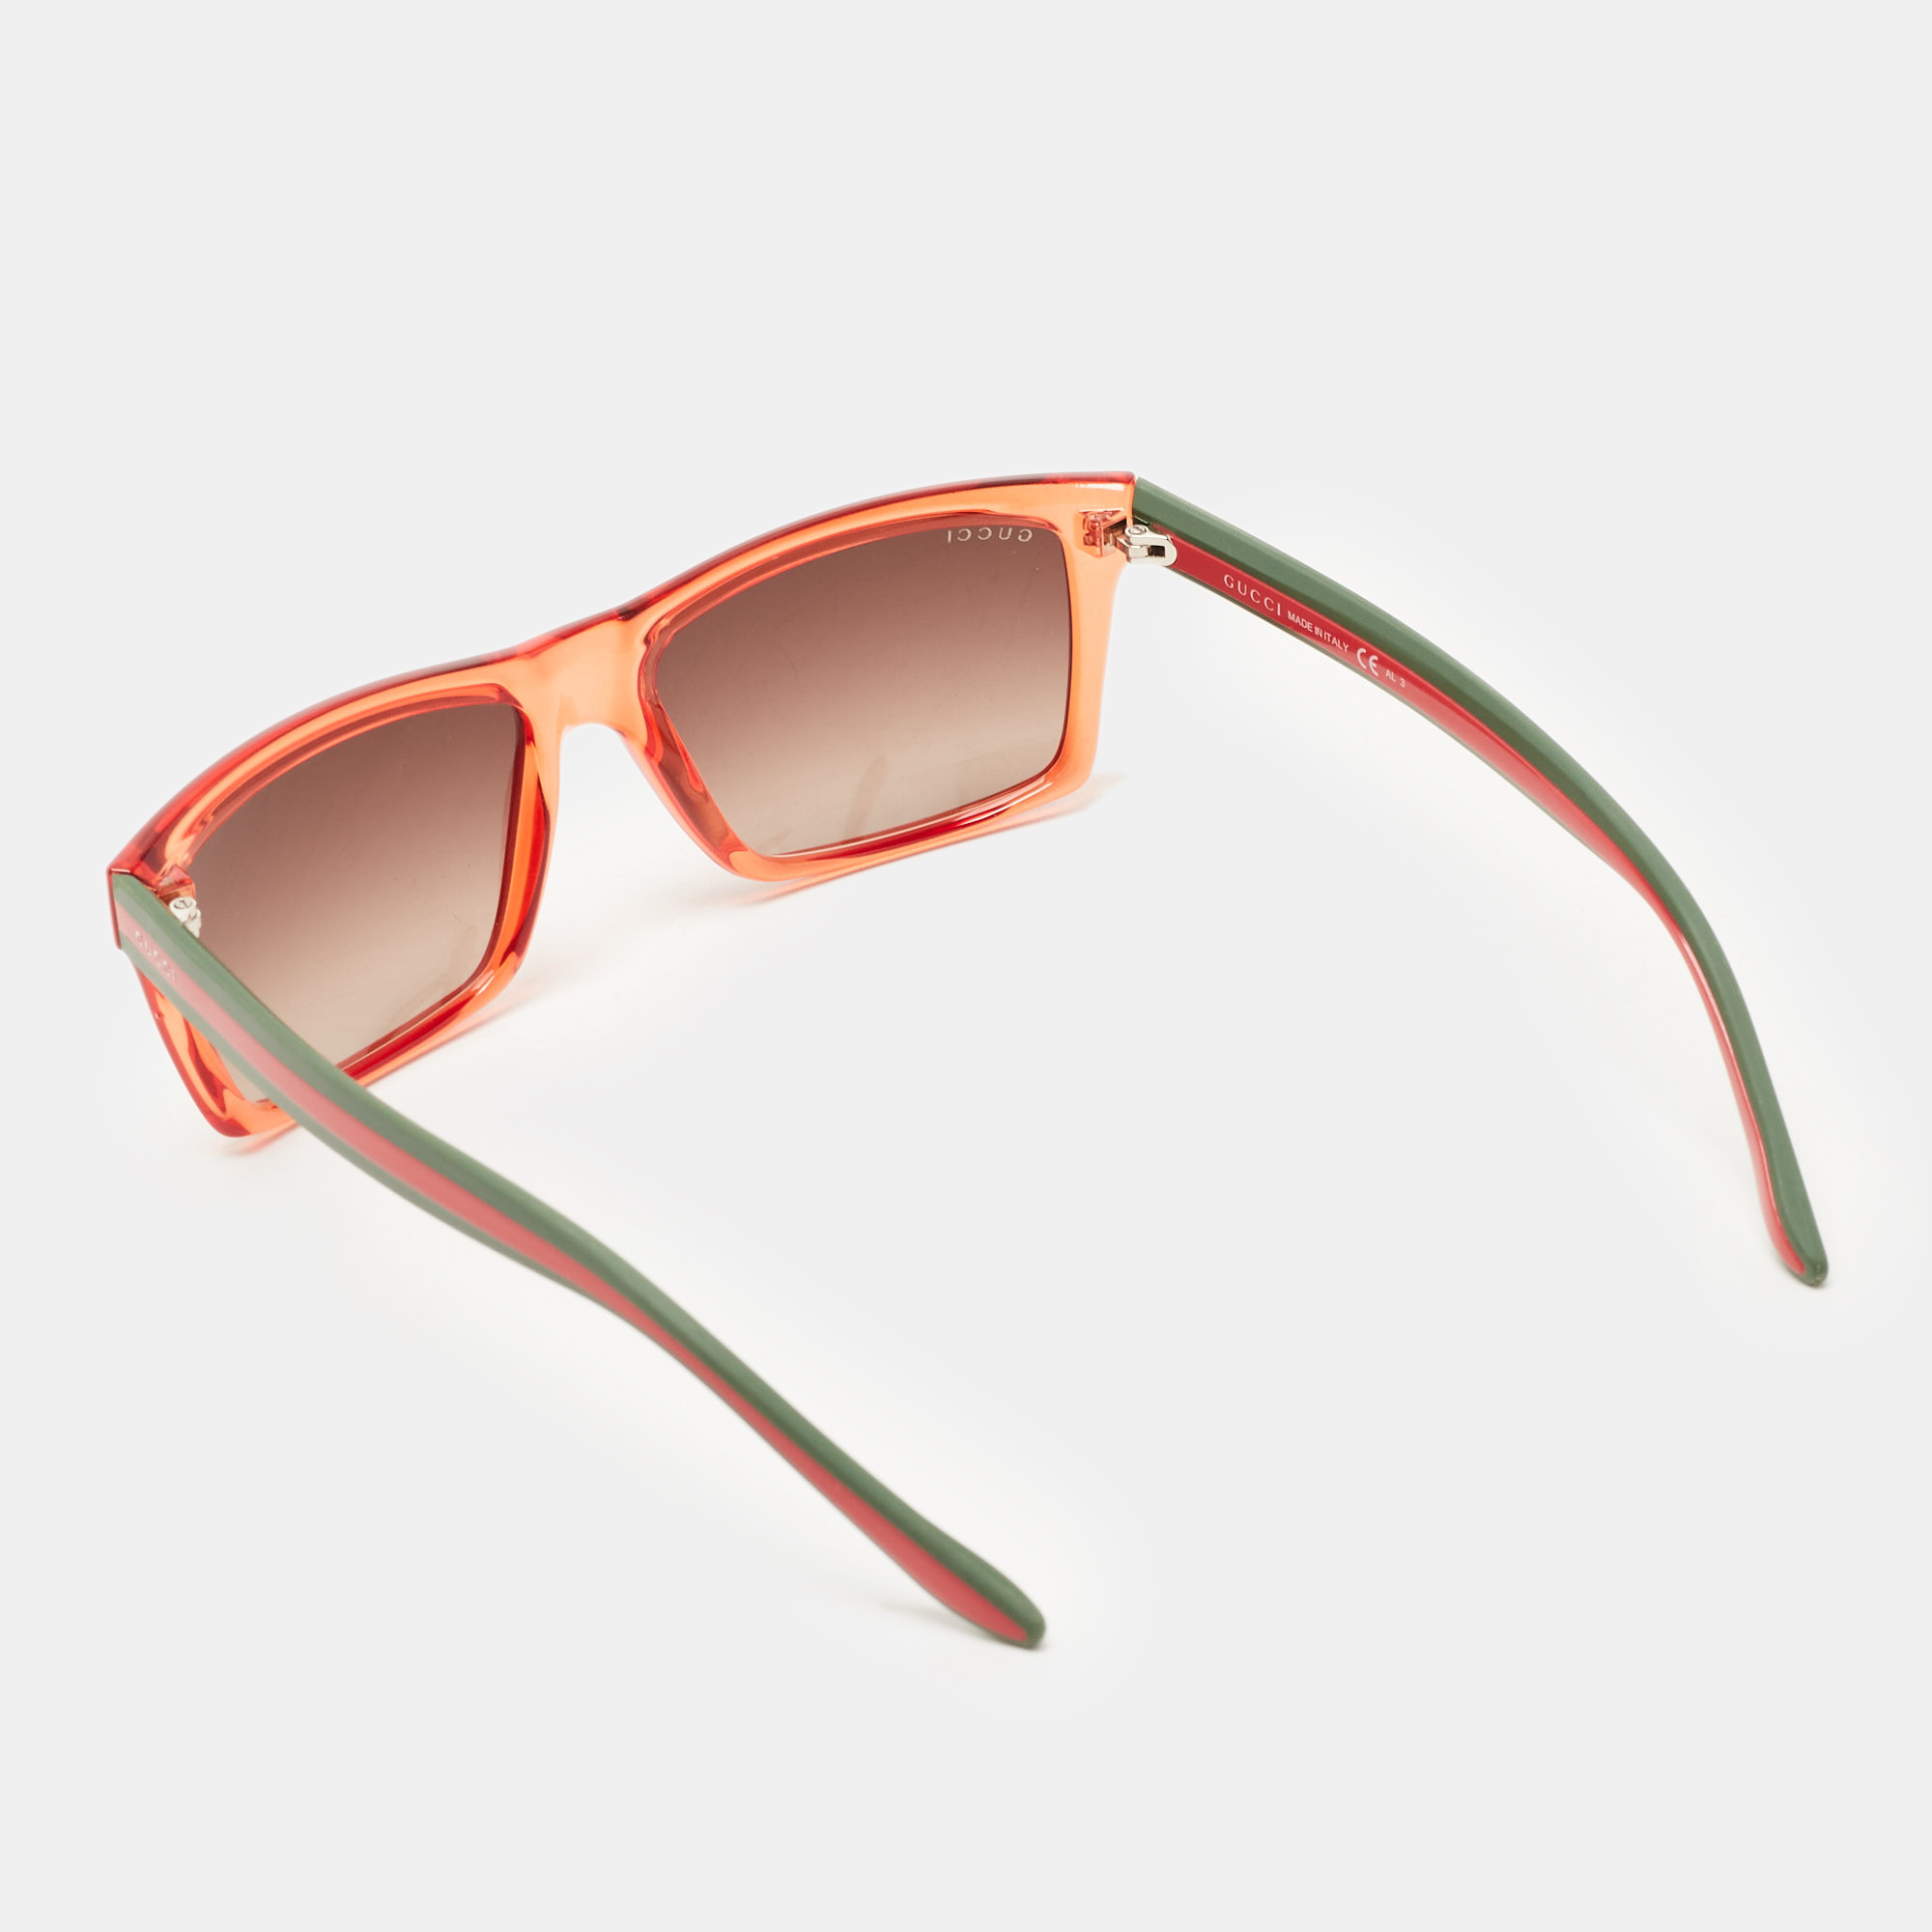 Gucci Red/Brown Gradient GG1013 Rectangle Sunglasses